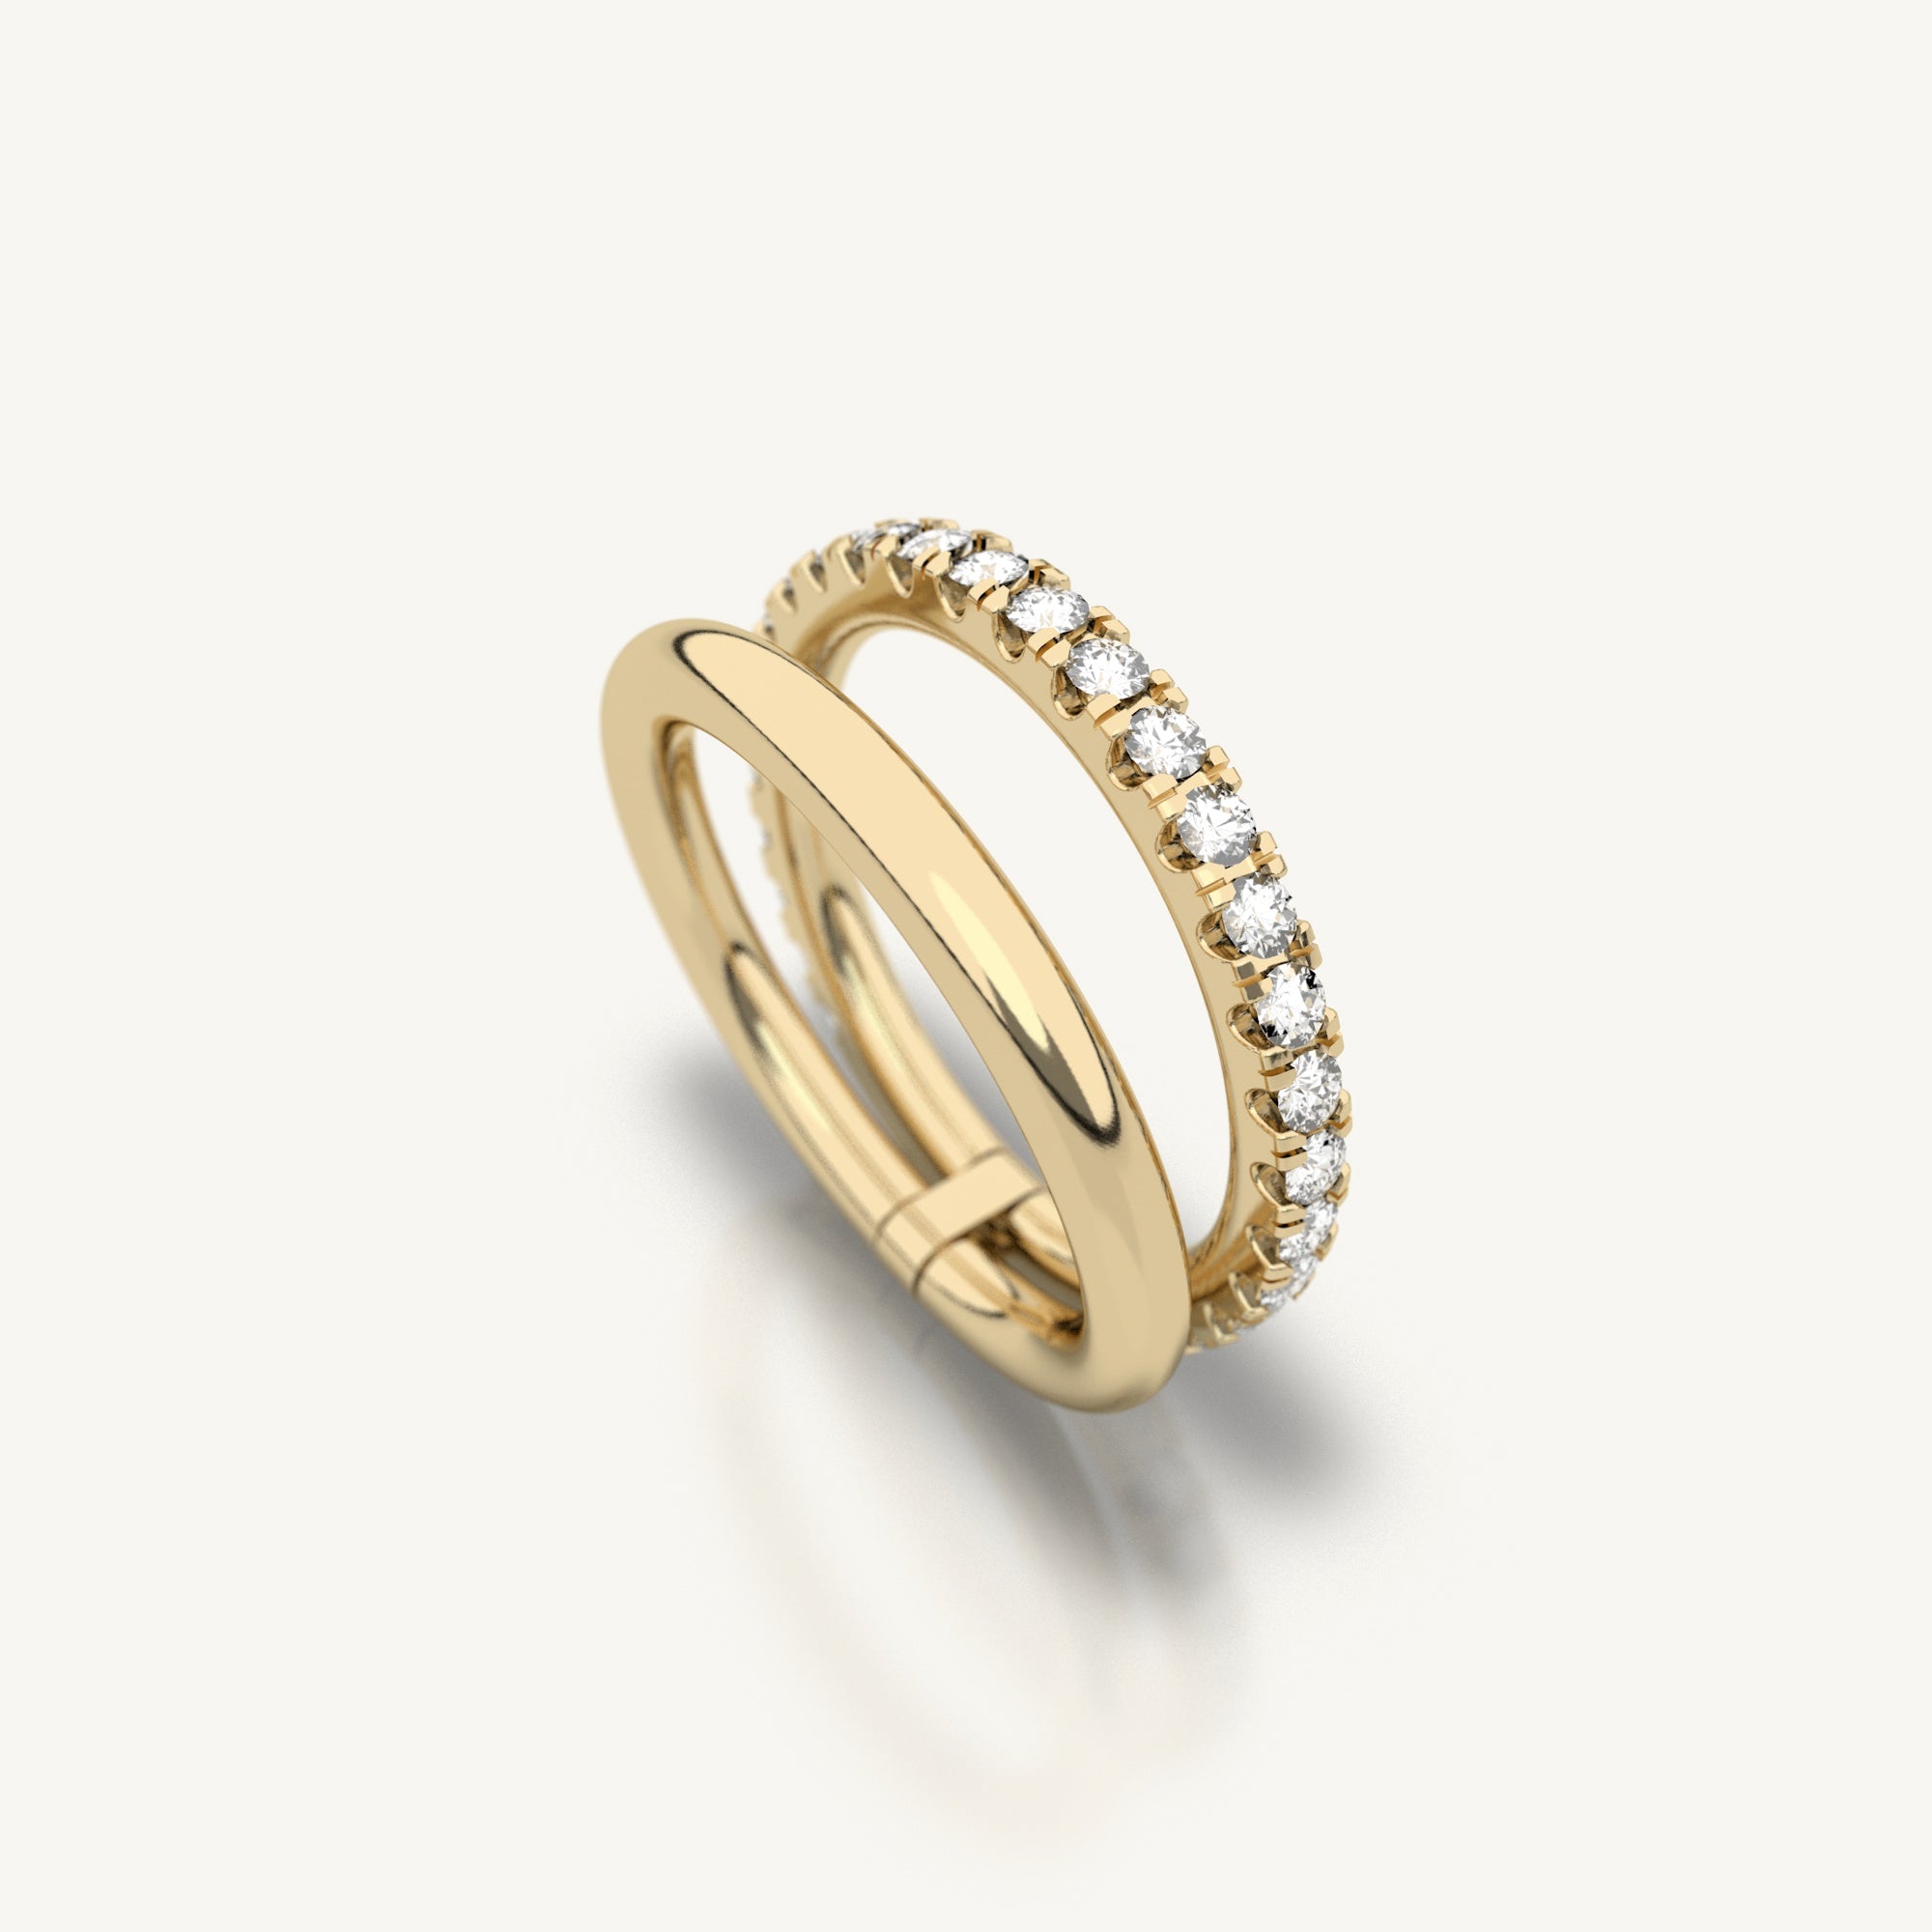 Duo ring from Inacio made from 18k recycled yellow gold and lab grown diamonds